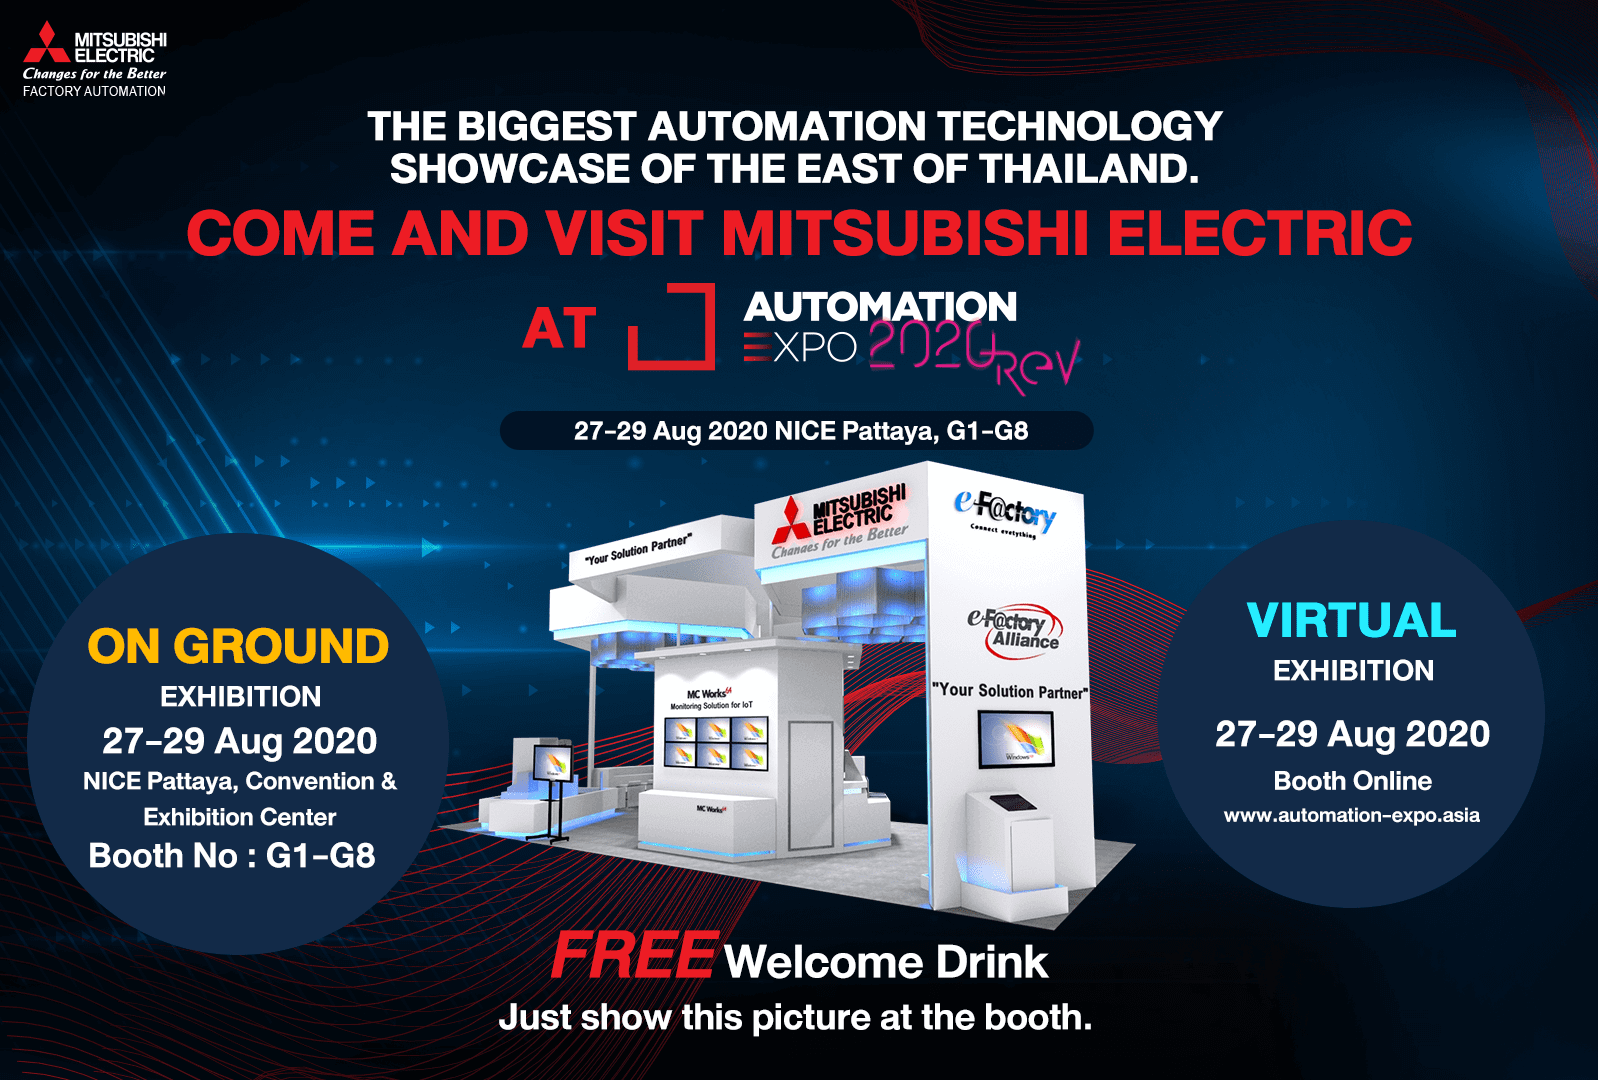 Automation Expo 2020